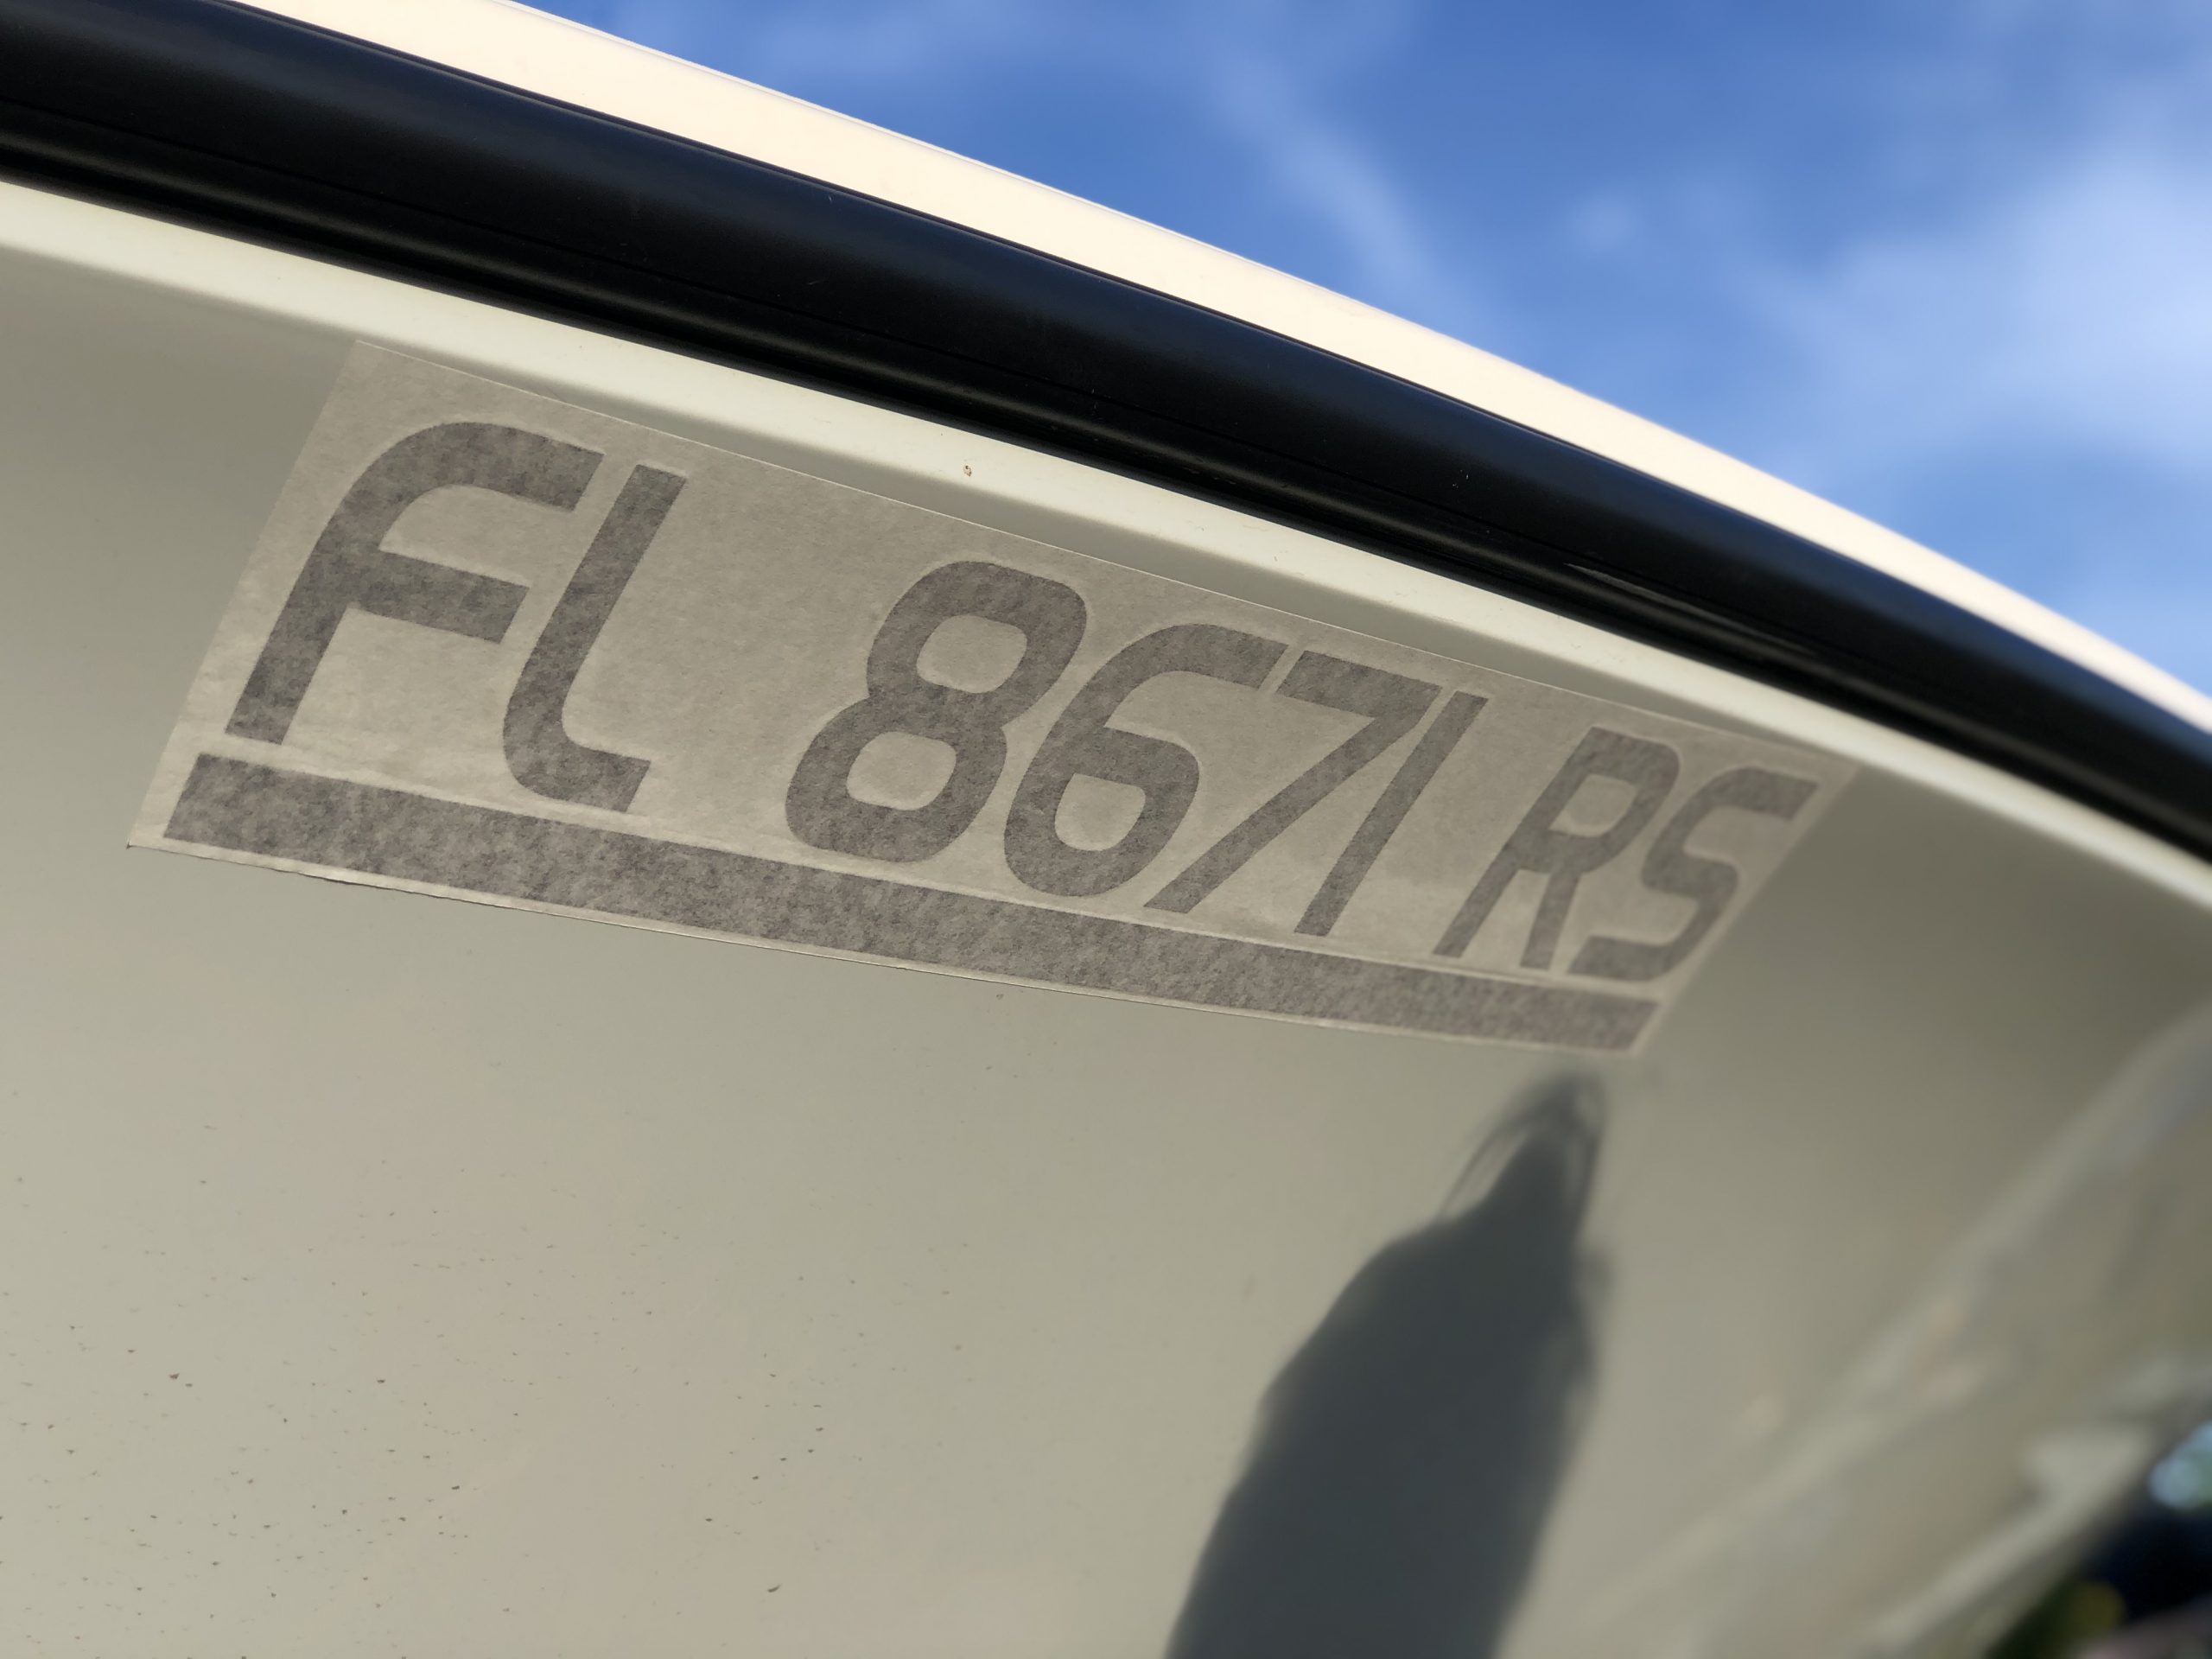 MarineReg affixed vessel registration numbers on bow of boat